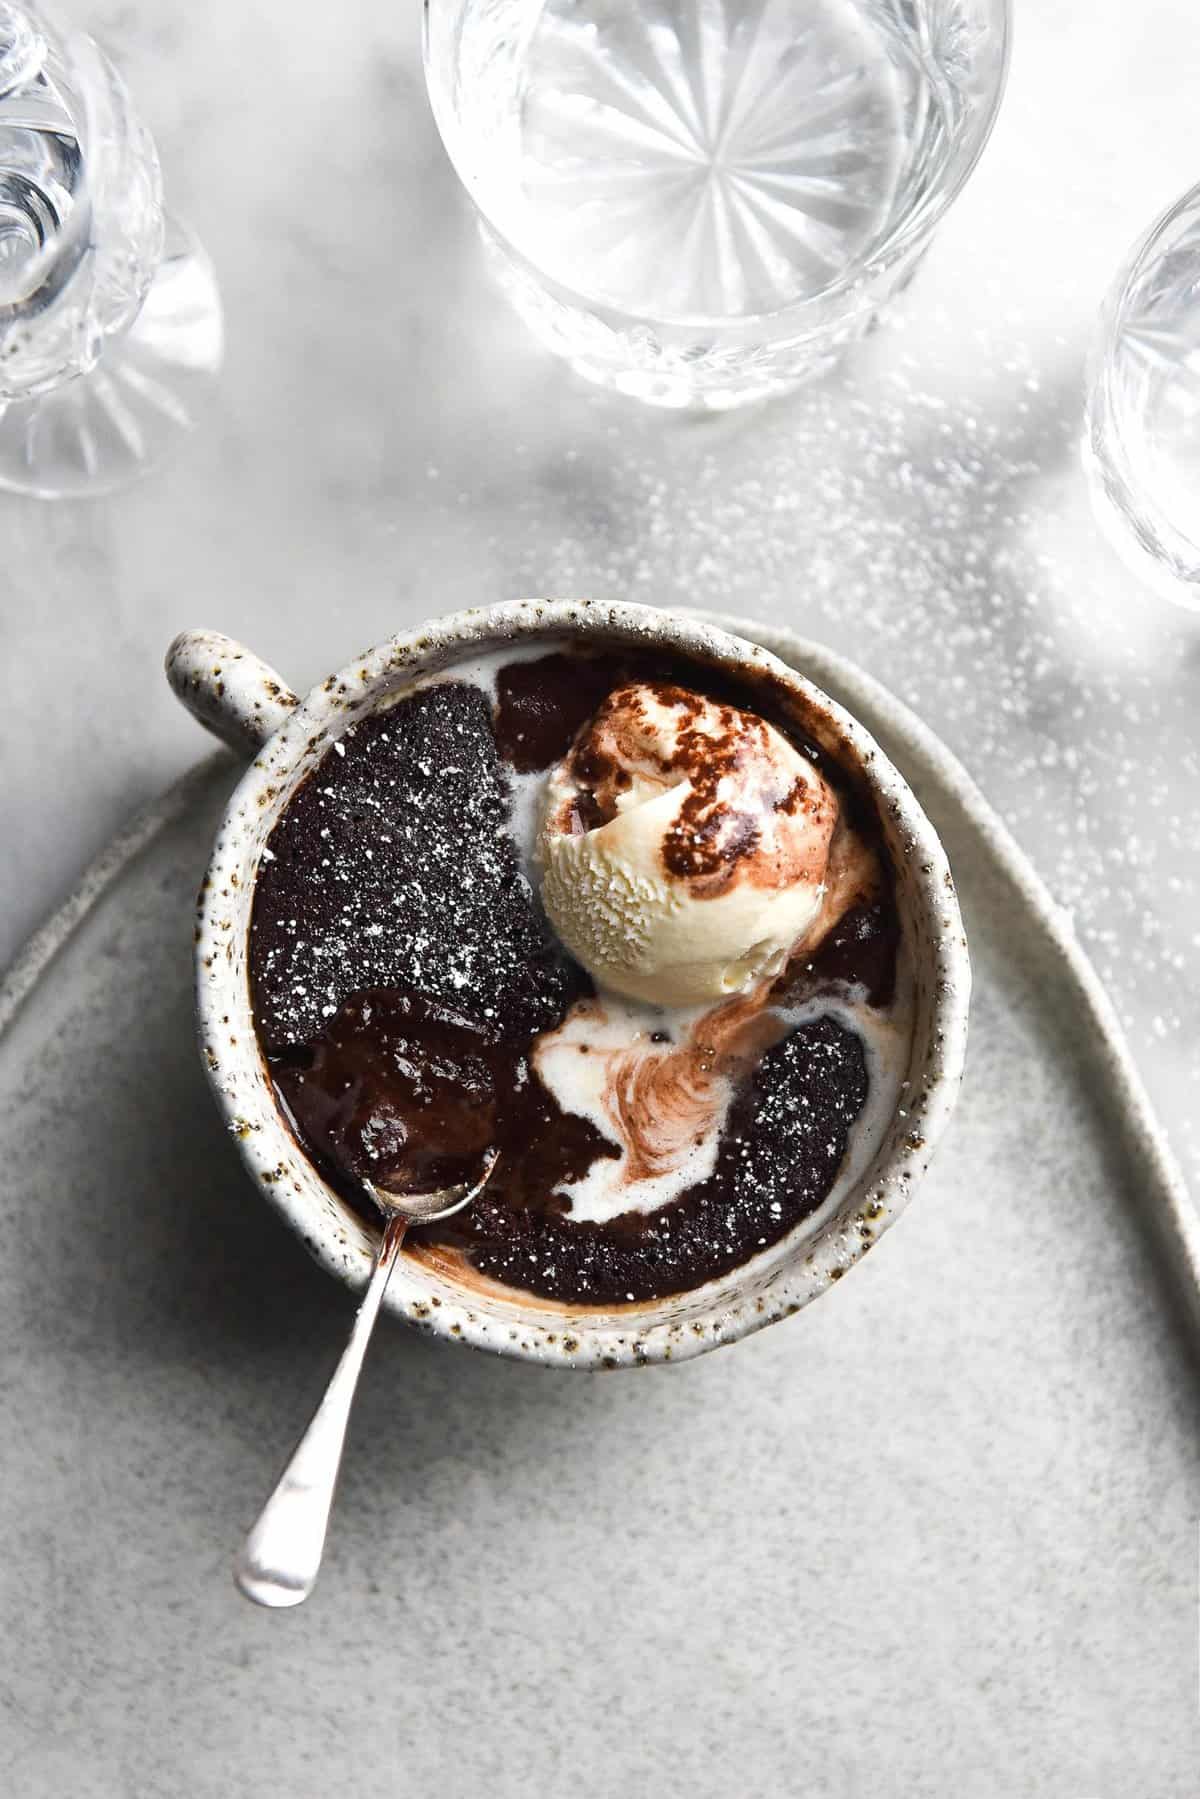 An aerial image of a refined sugar free and gluten free vegan chocolate mug cake in a white speckled ceramic mug atop a white ceramic plate. The mug cake is topped with vanilla ice cream which has melted and swirled into the chocolate mug cake. 